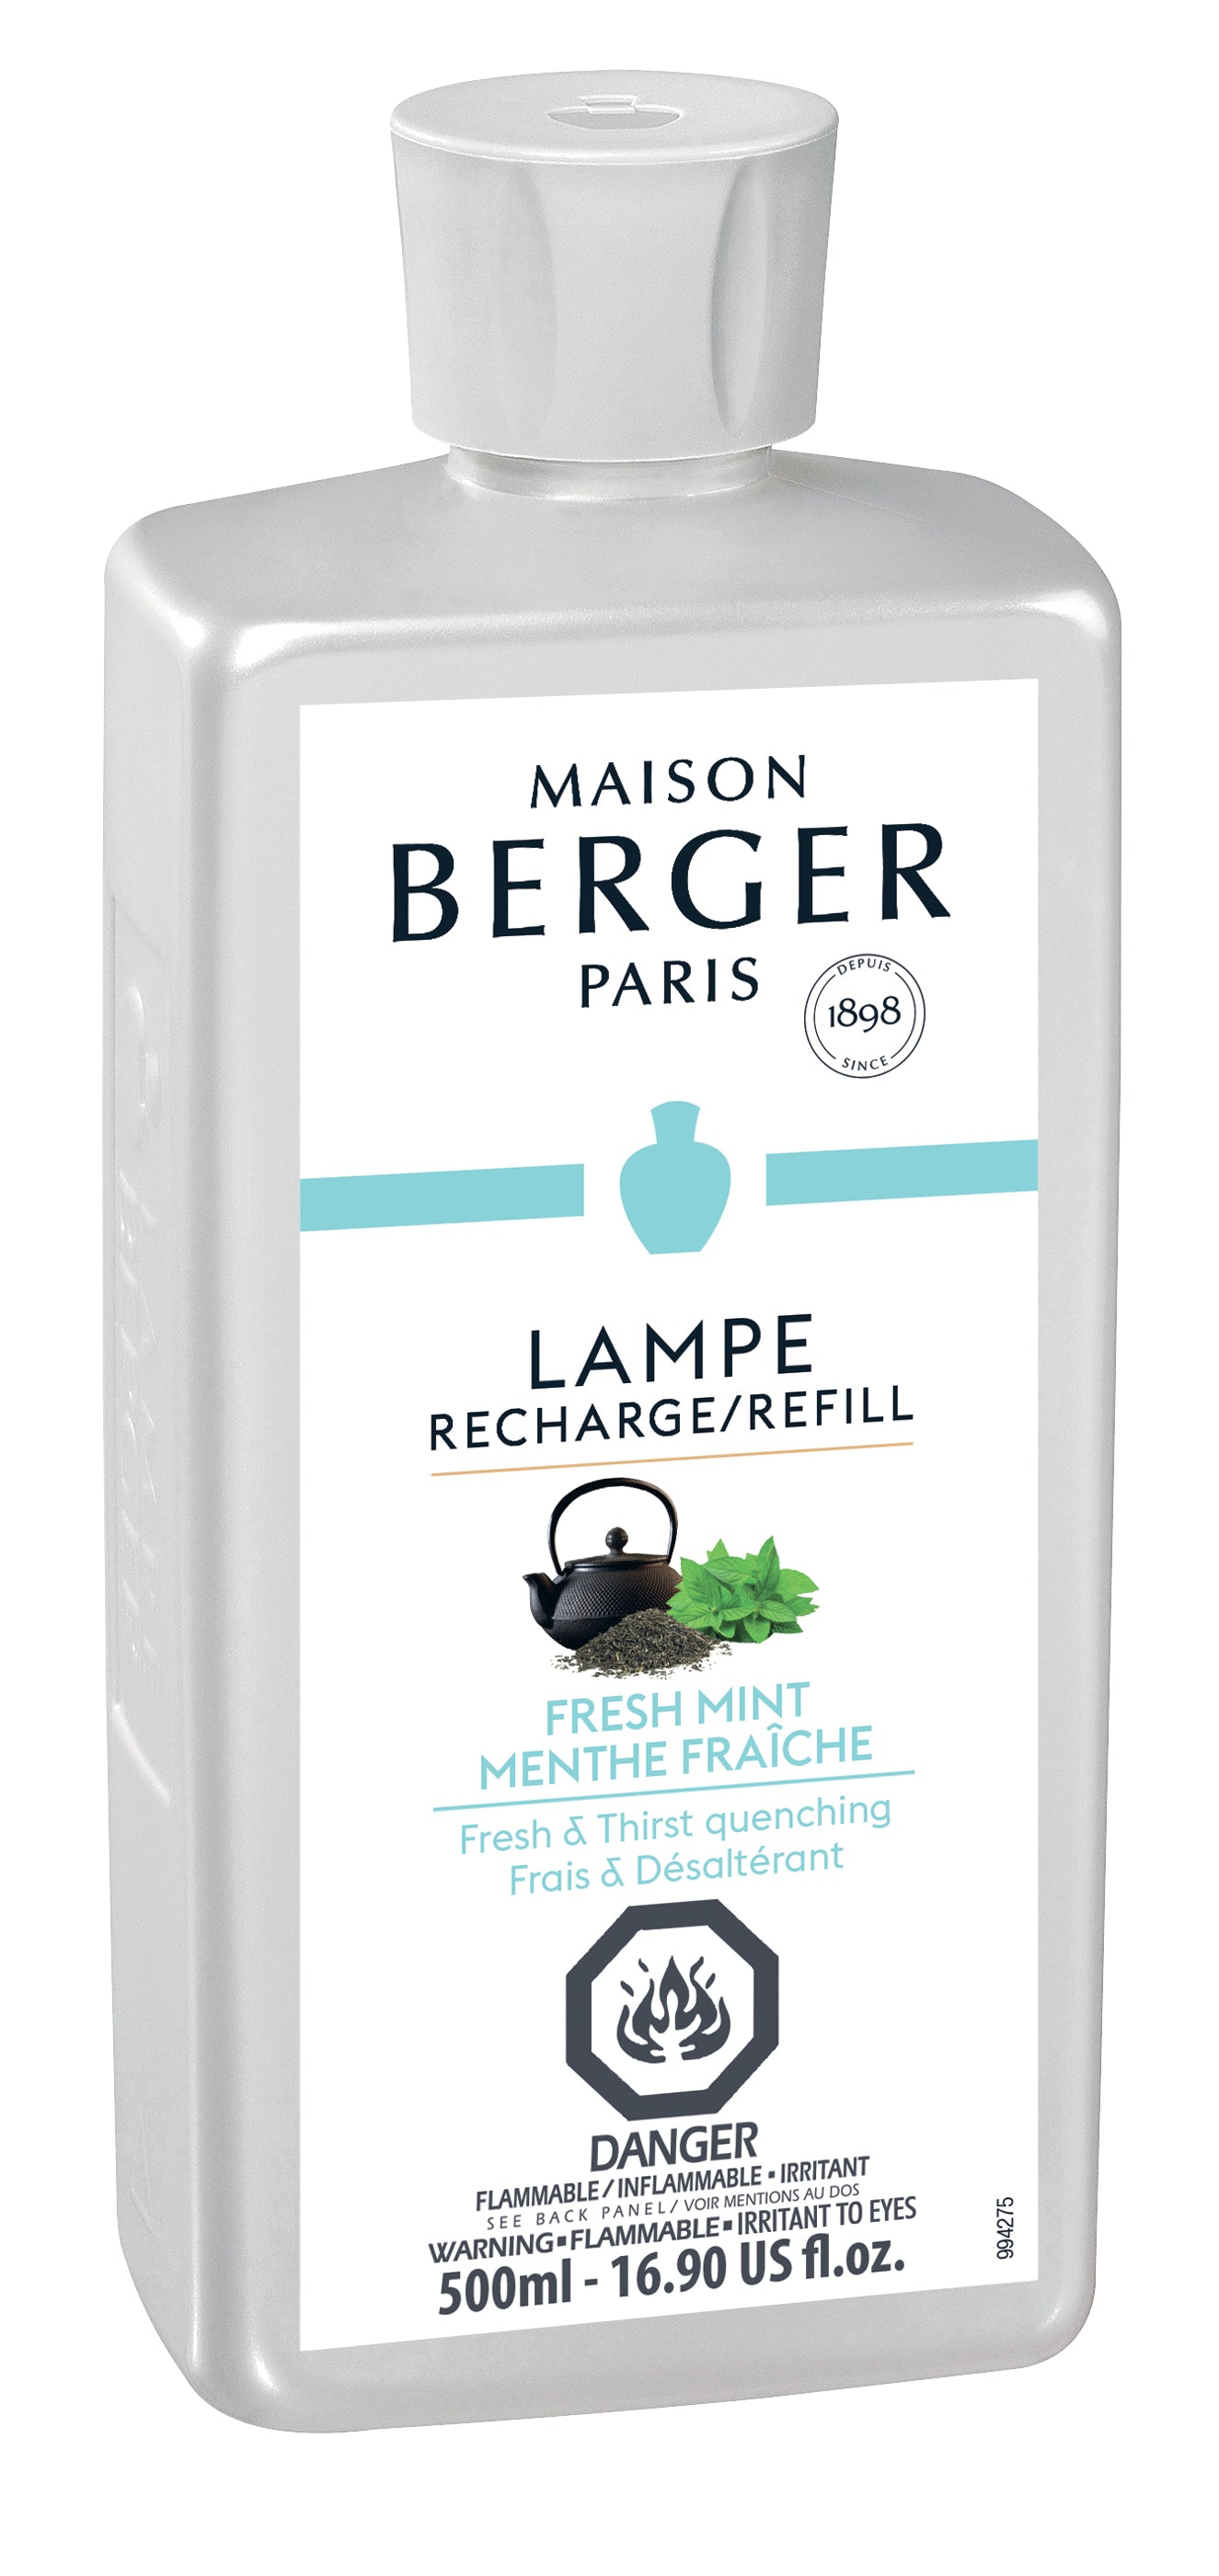 Lampe Berger Refill Fresh Mint at the Riad